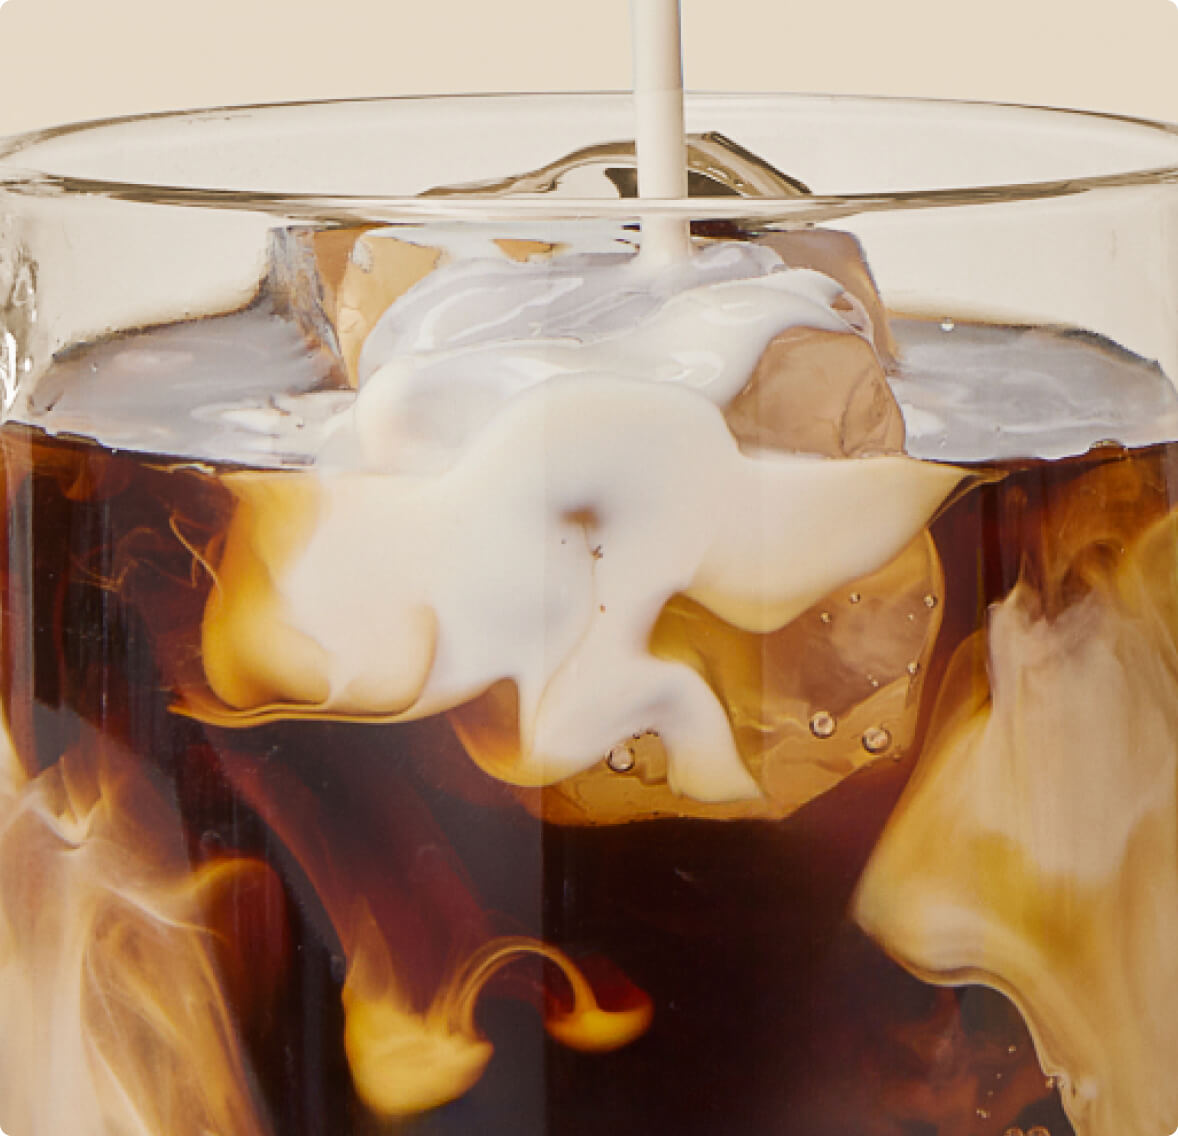  An image of a chilled glass of coffee with milk, served over ice cubes, offering a cool and creamy beverage.